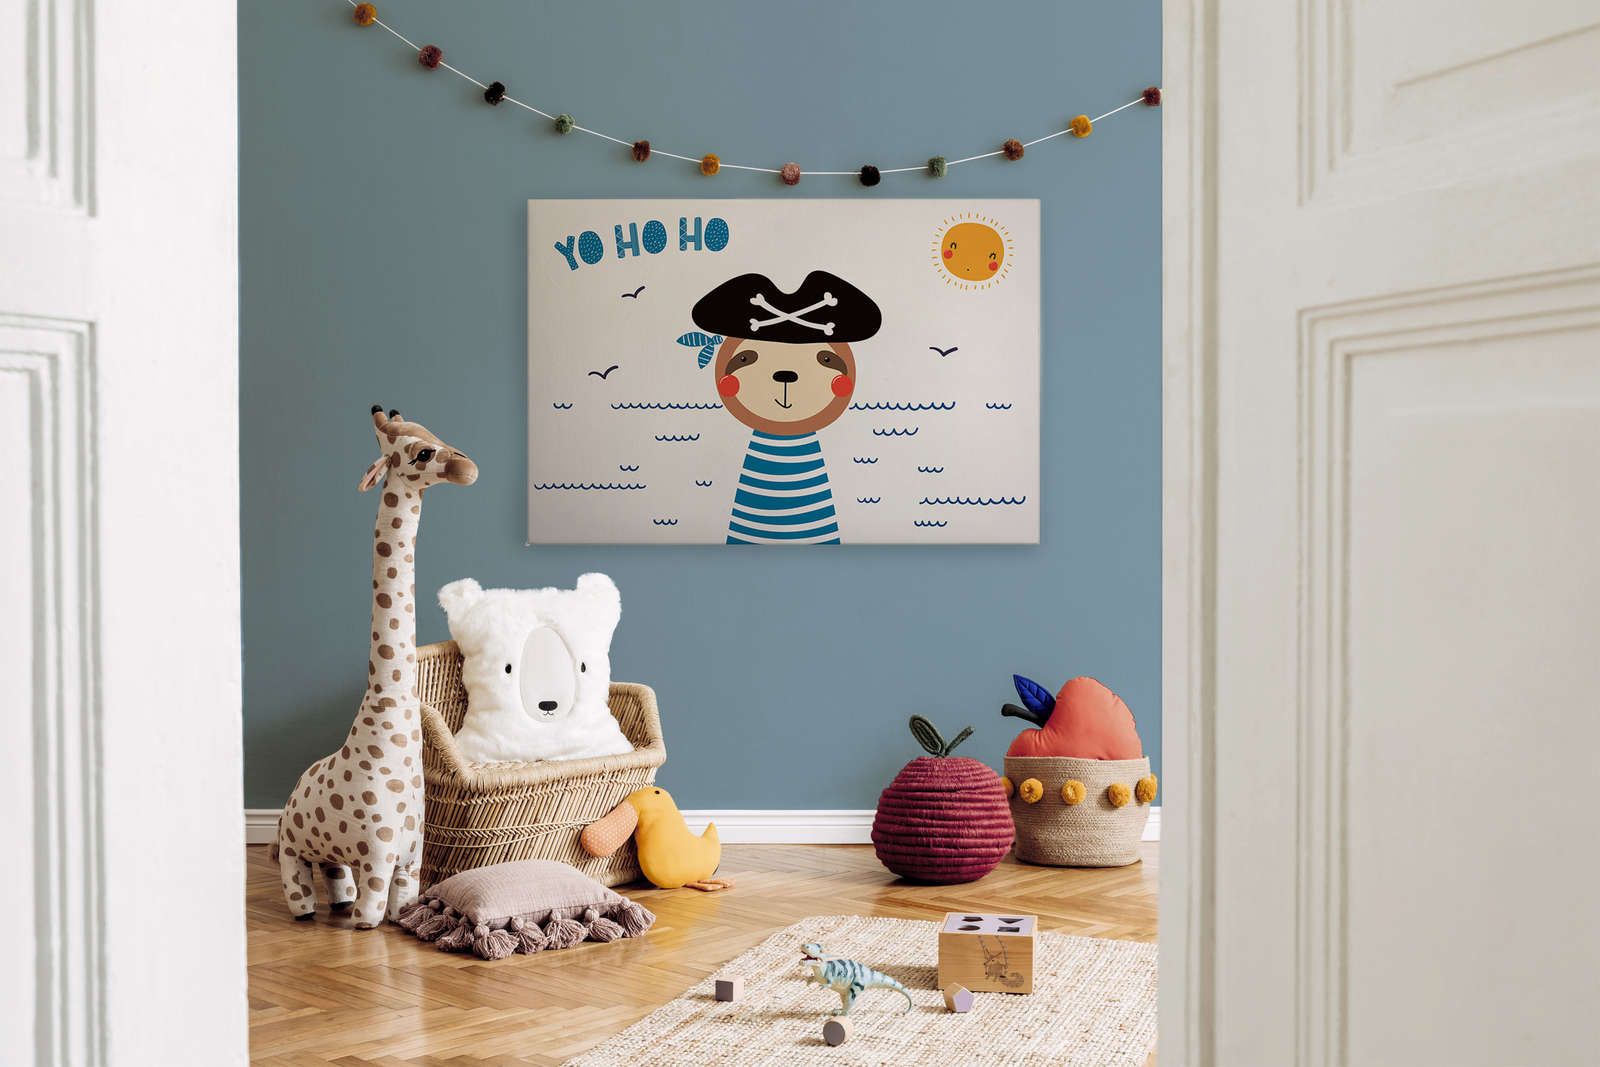             Canvas for children's room with bear pirate - 120 cm x 80 cm
        